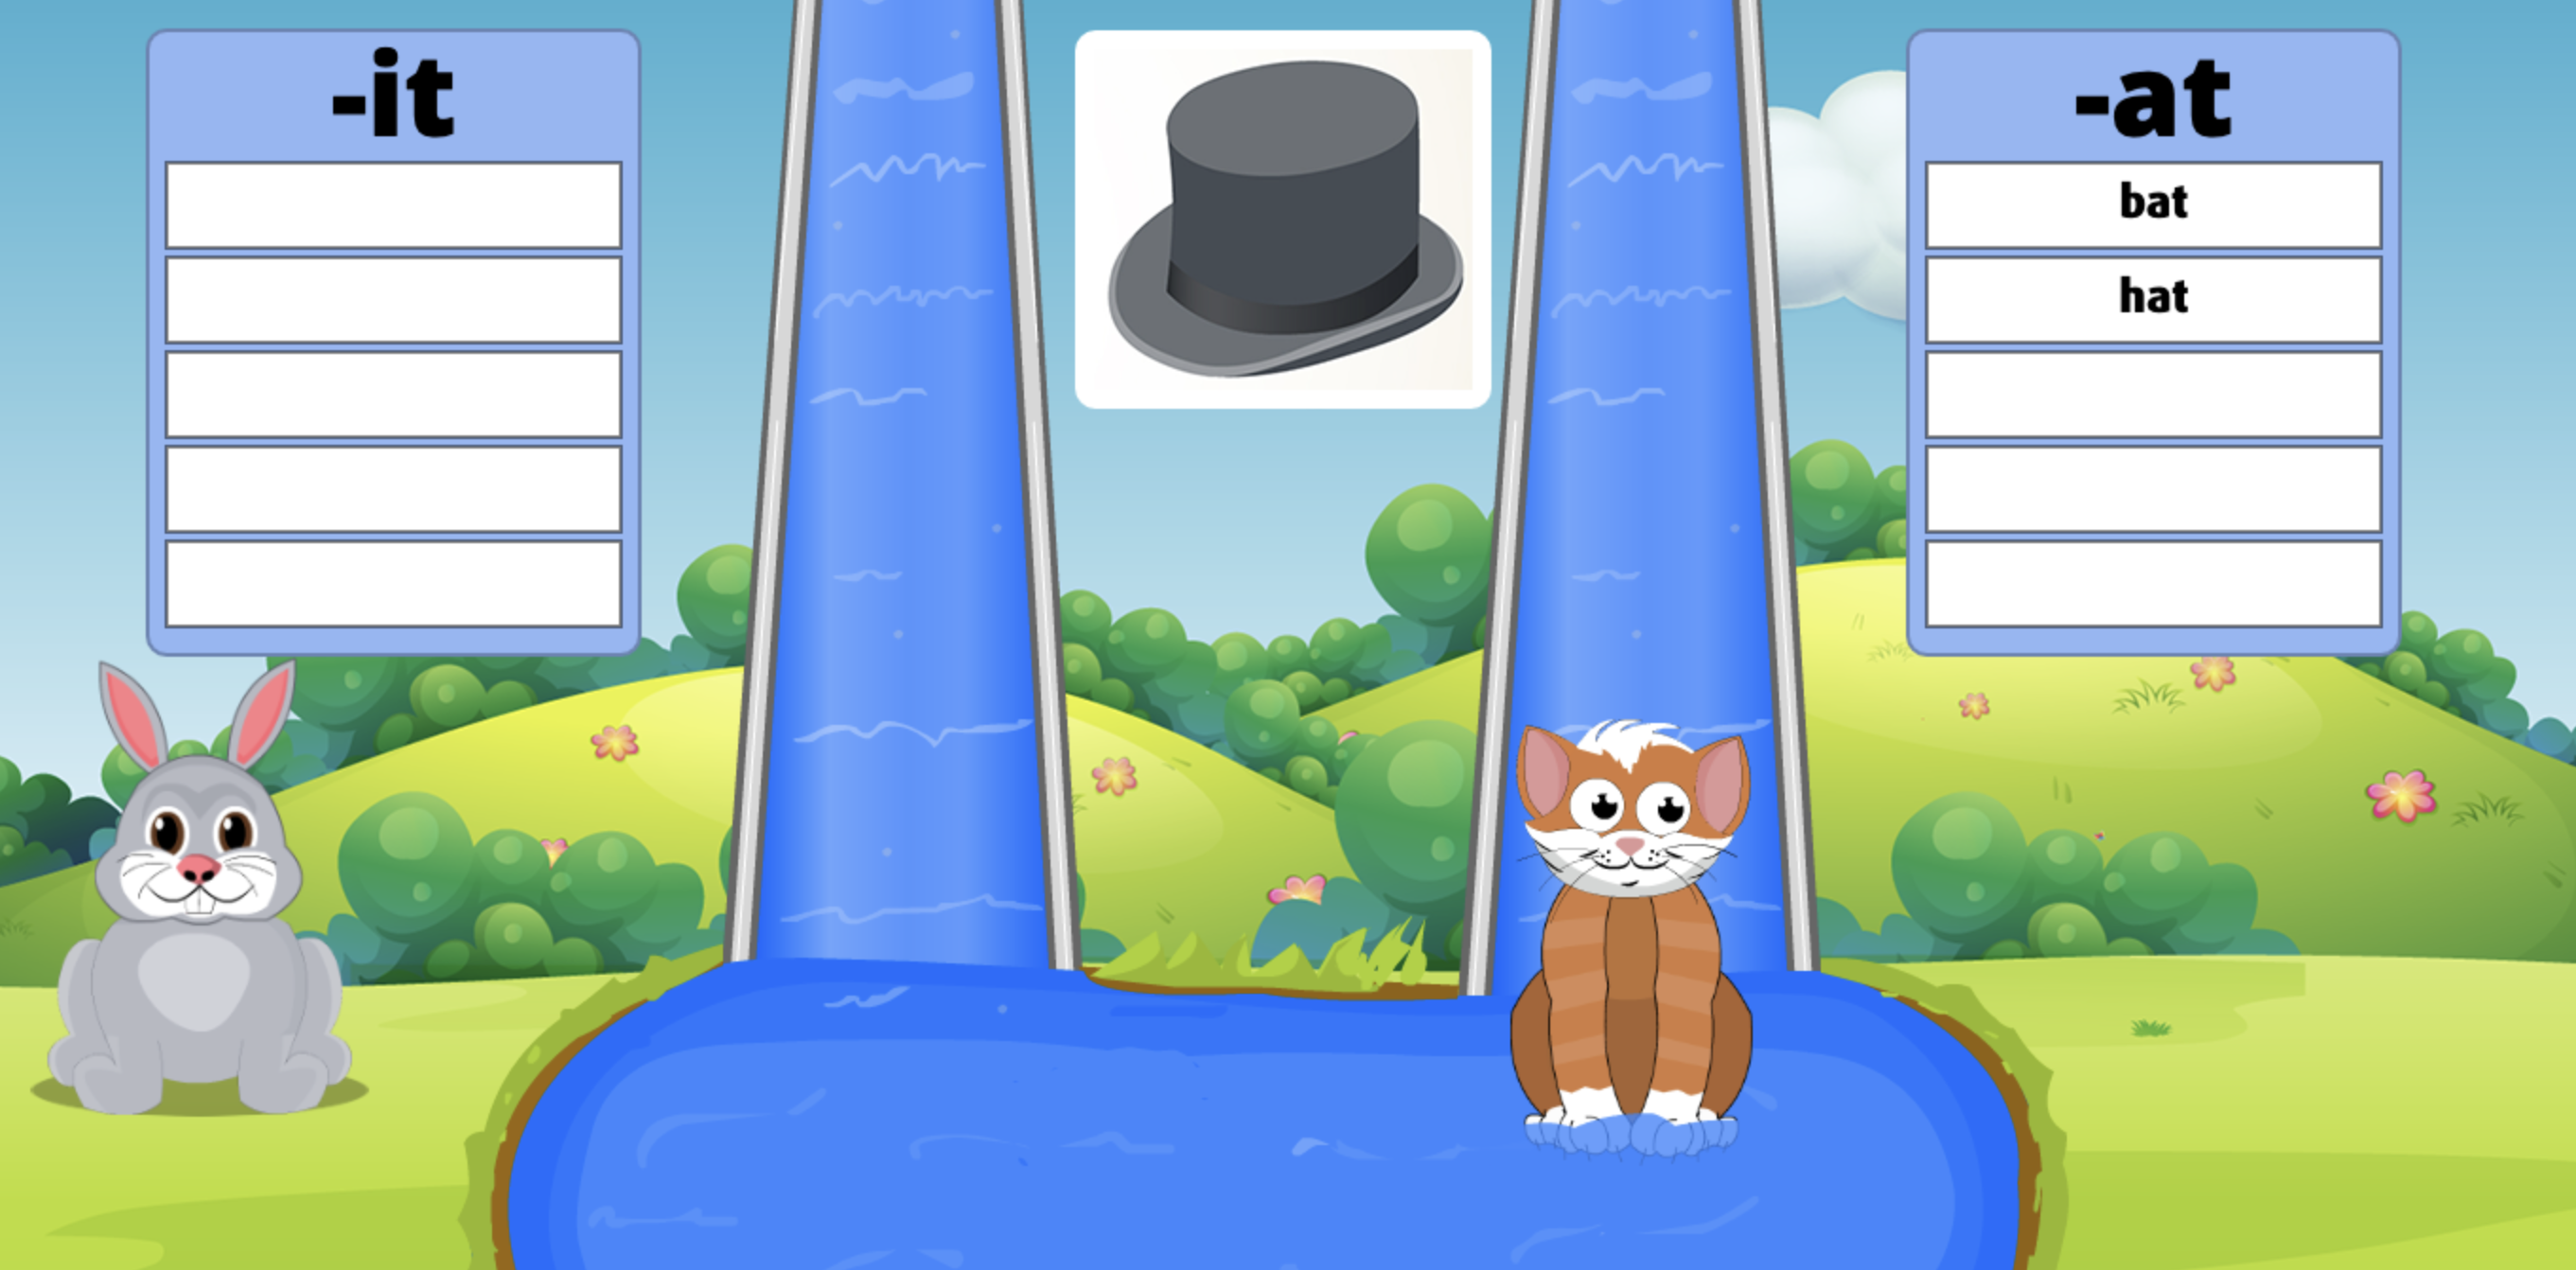 Select which word family hat belongs to to make Rabbit and Cat slide down the water slide